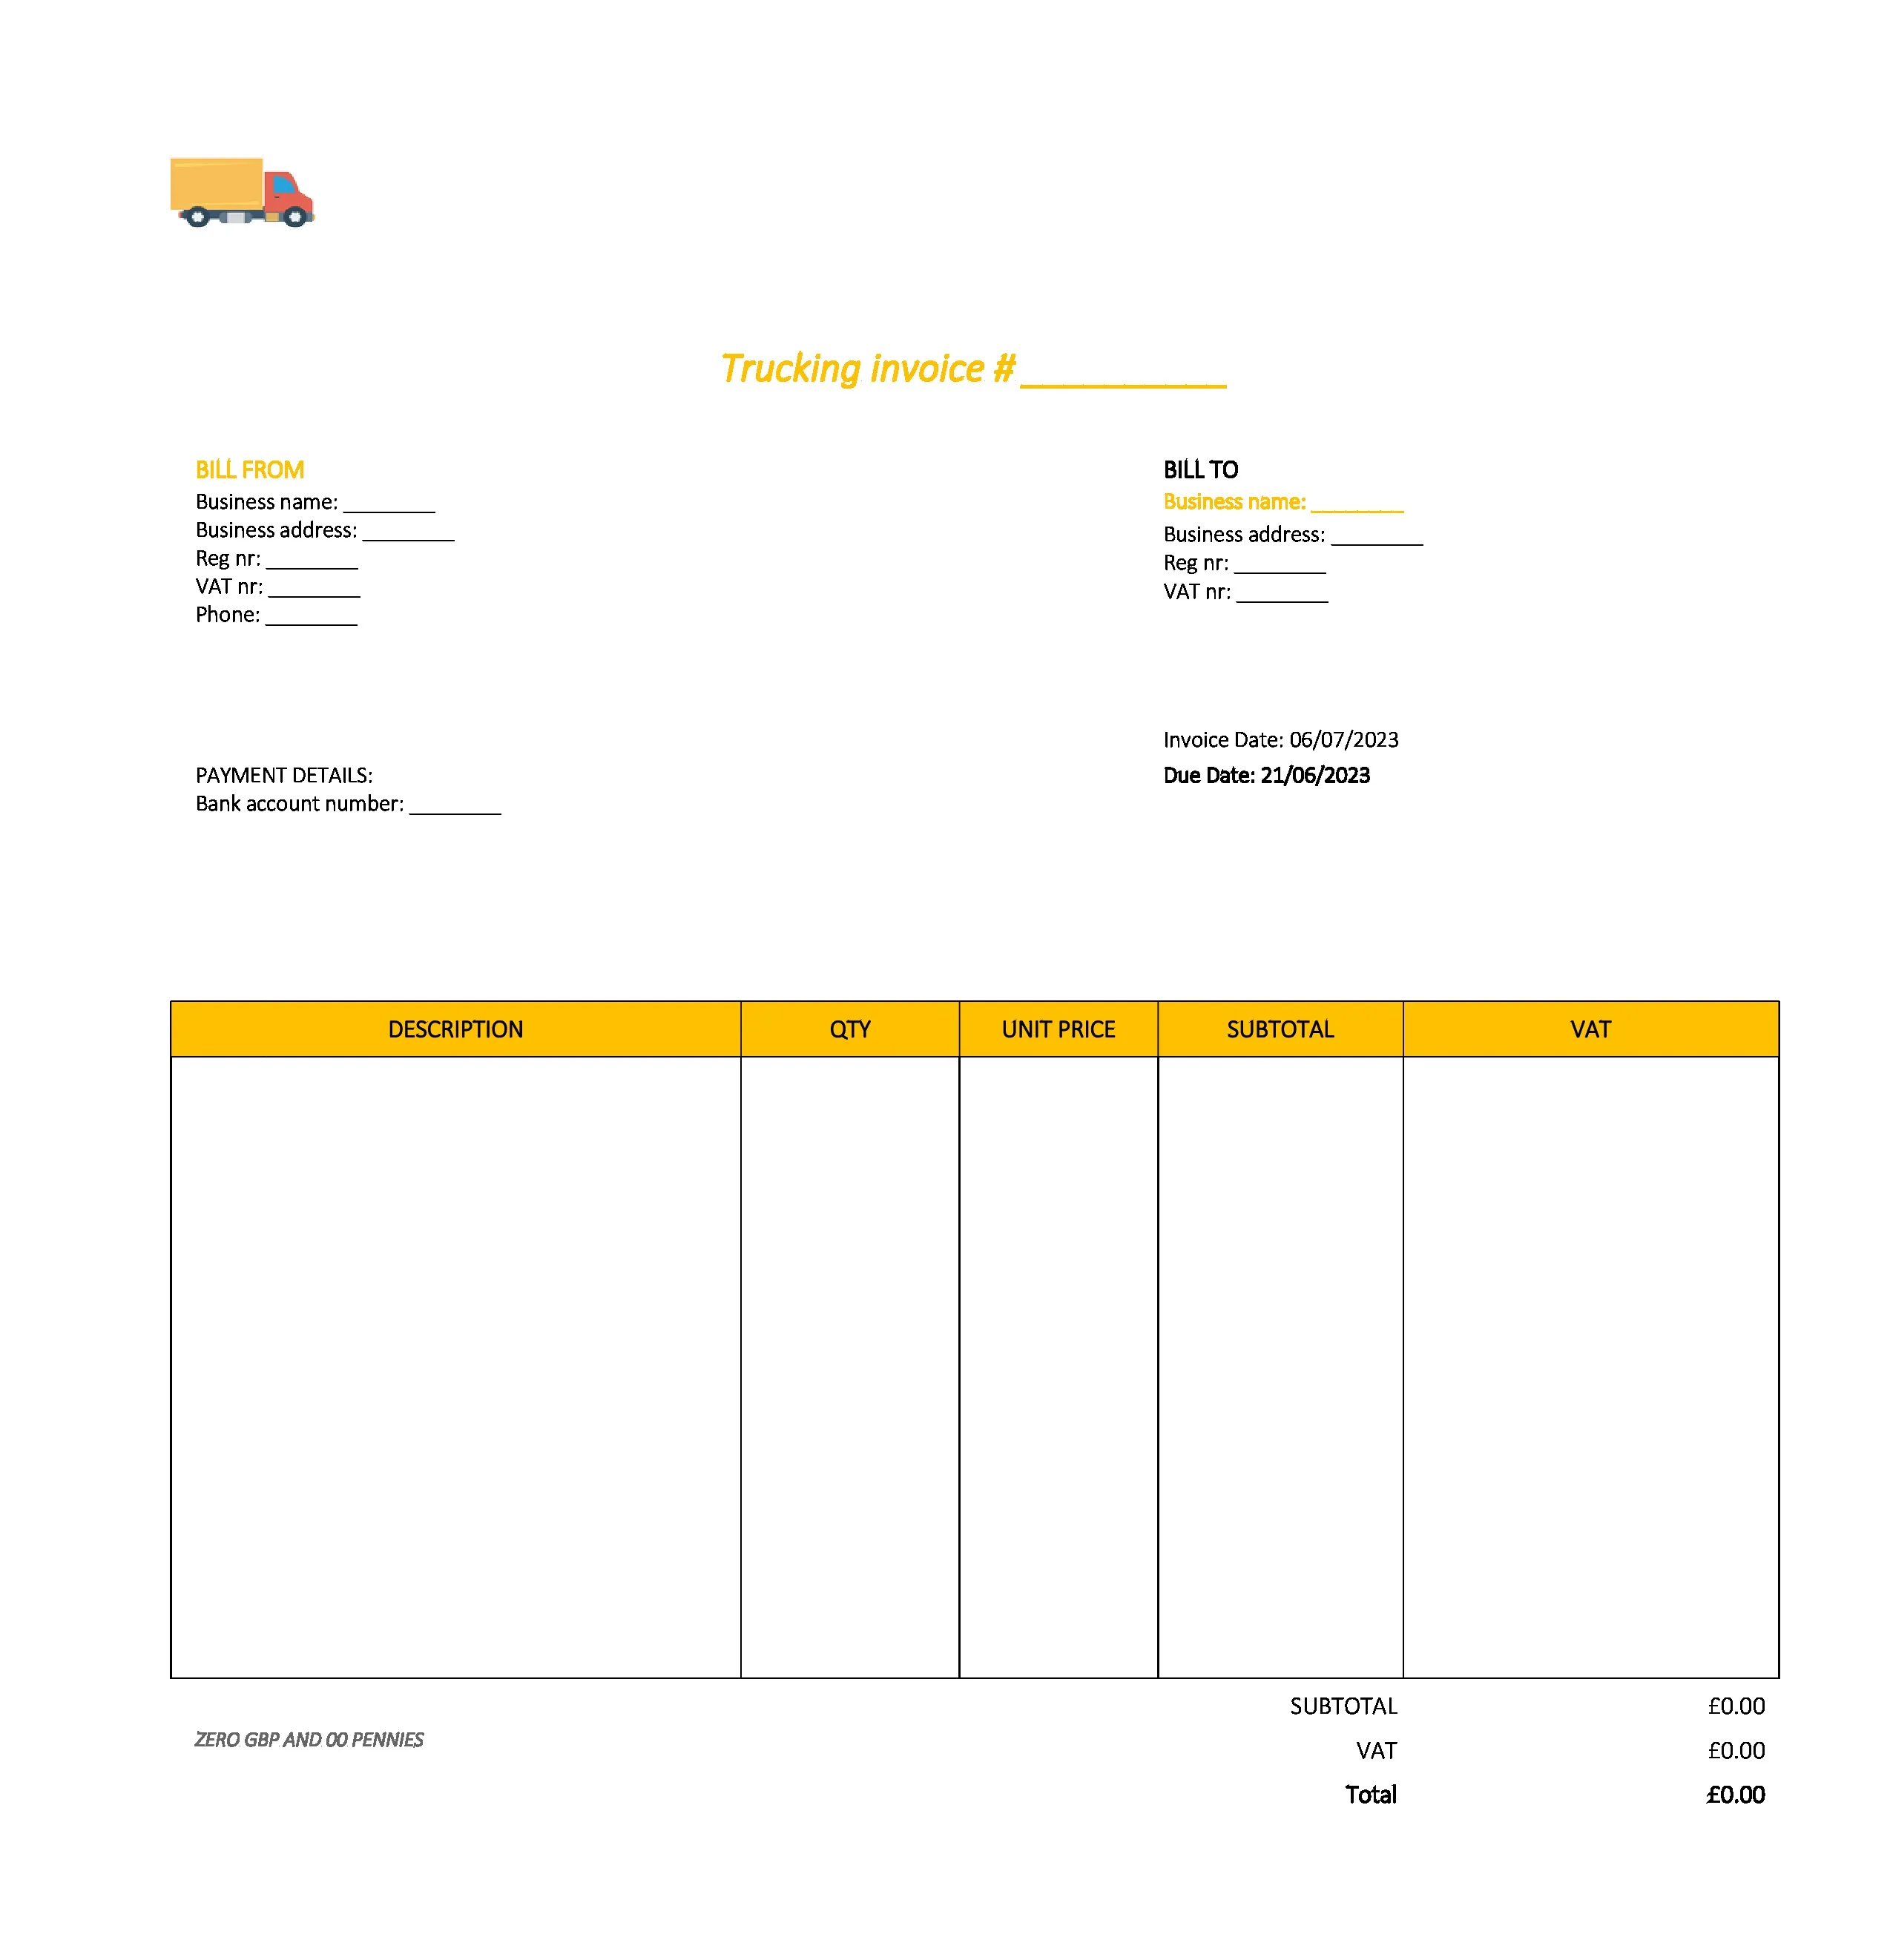 draft trucking invoice template UK Excel / Google sheets